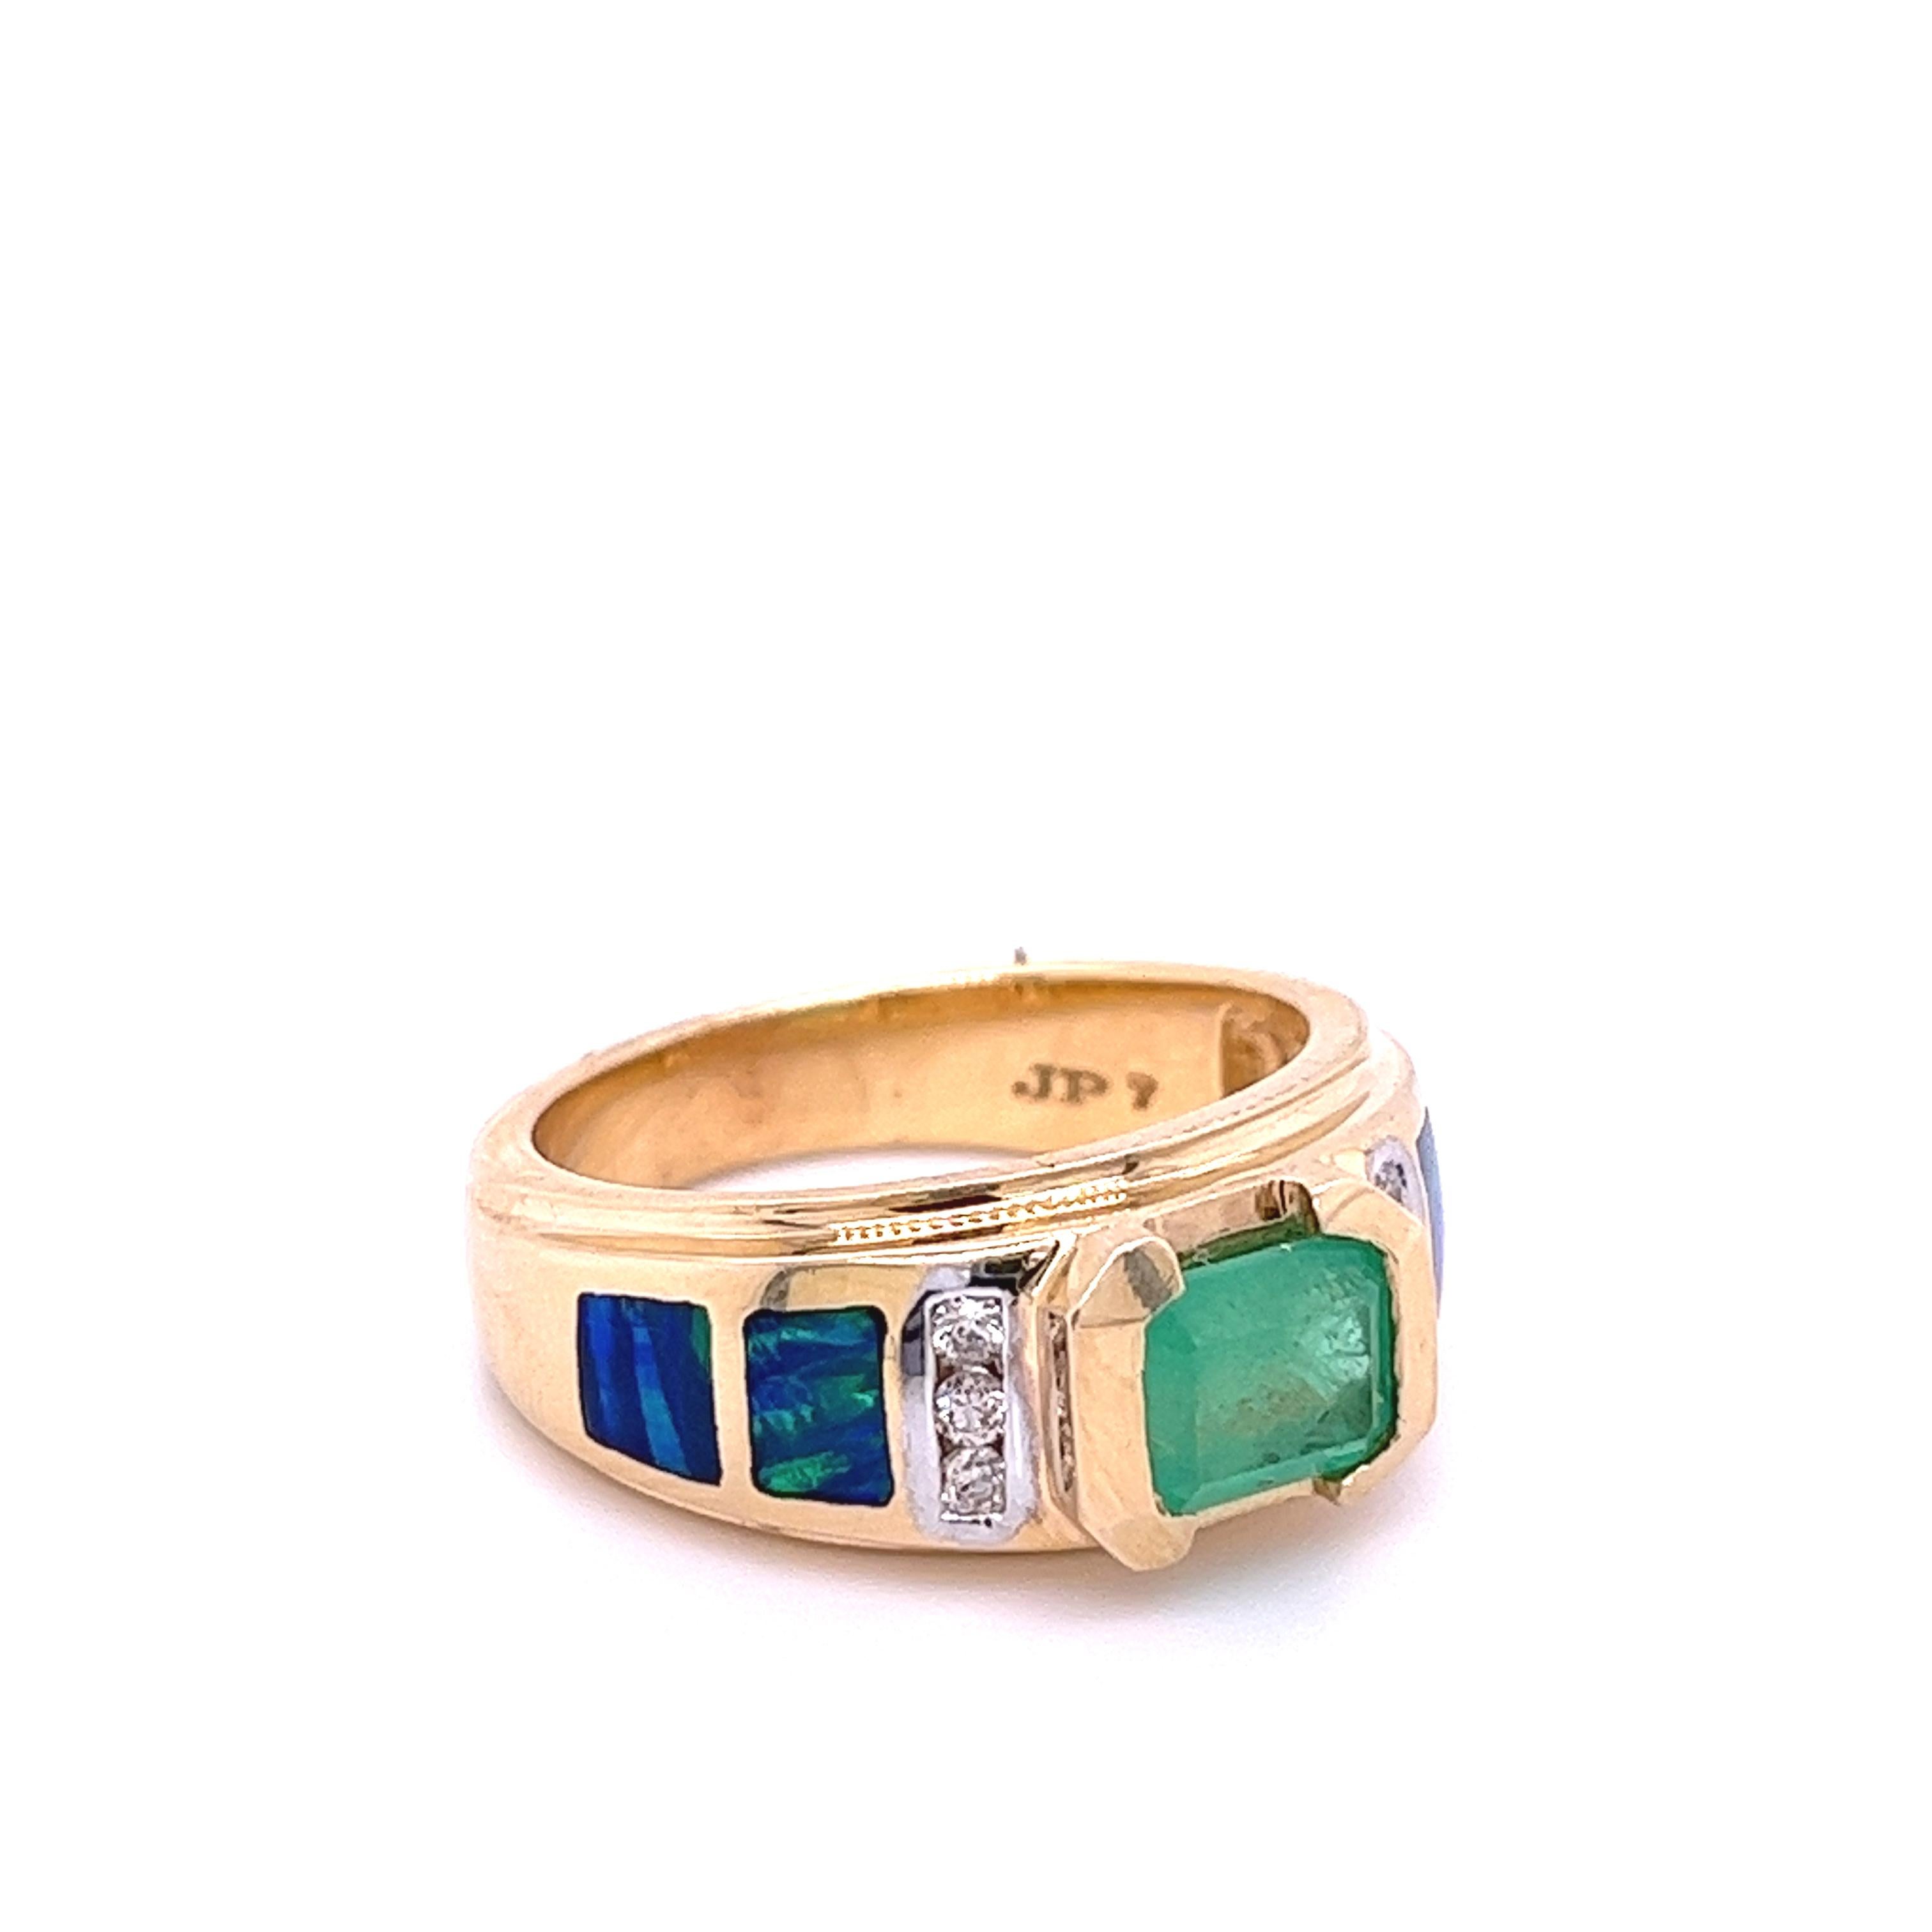 Sleek and classy Colombian Emerald ring with inlaid opals and diamond accents. Emerald-cut Emerald mounted in a 14k half bezel setting. Inlaid Opals provide excellent color contrast to the yellow gold setting and white diamond side stones. 

14k